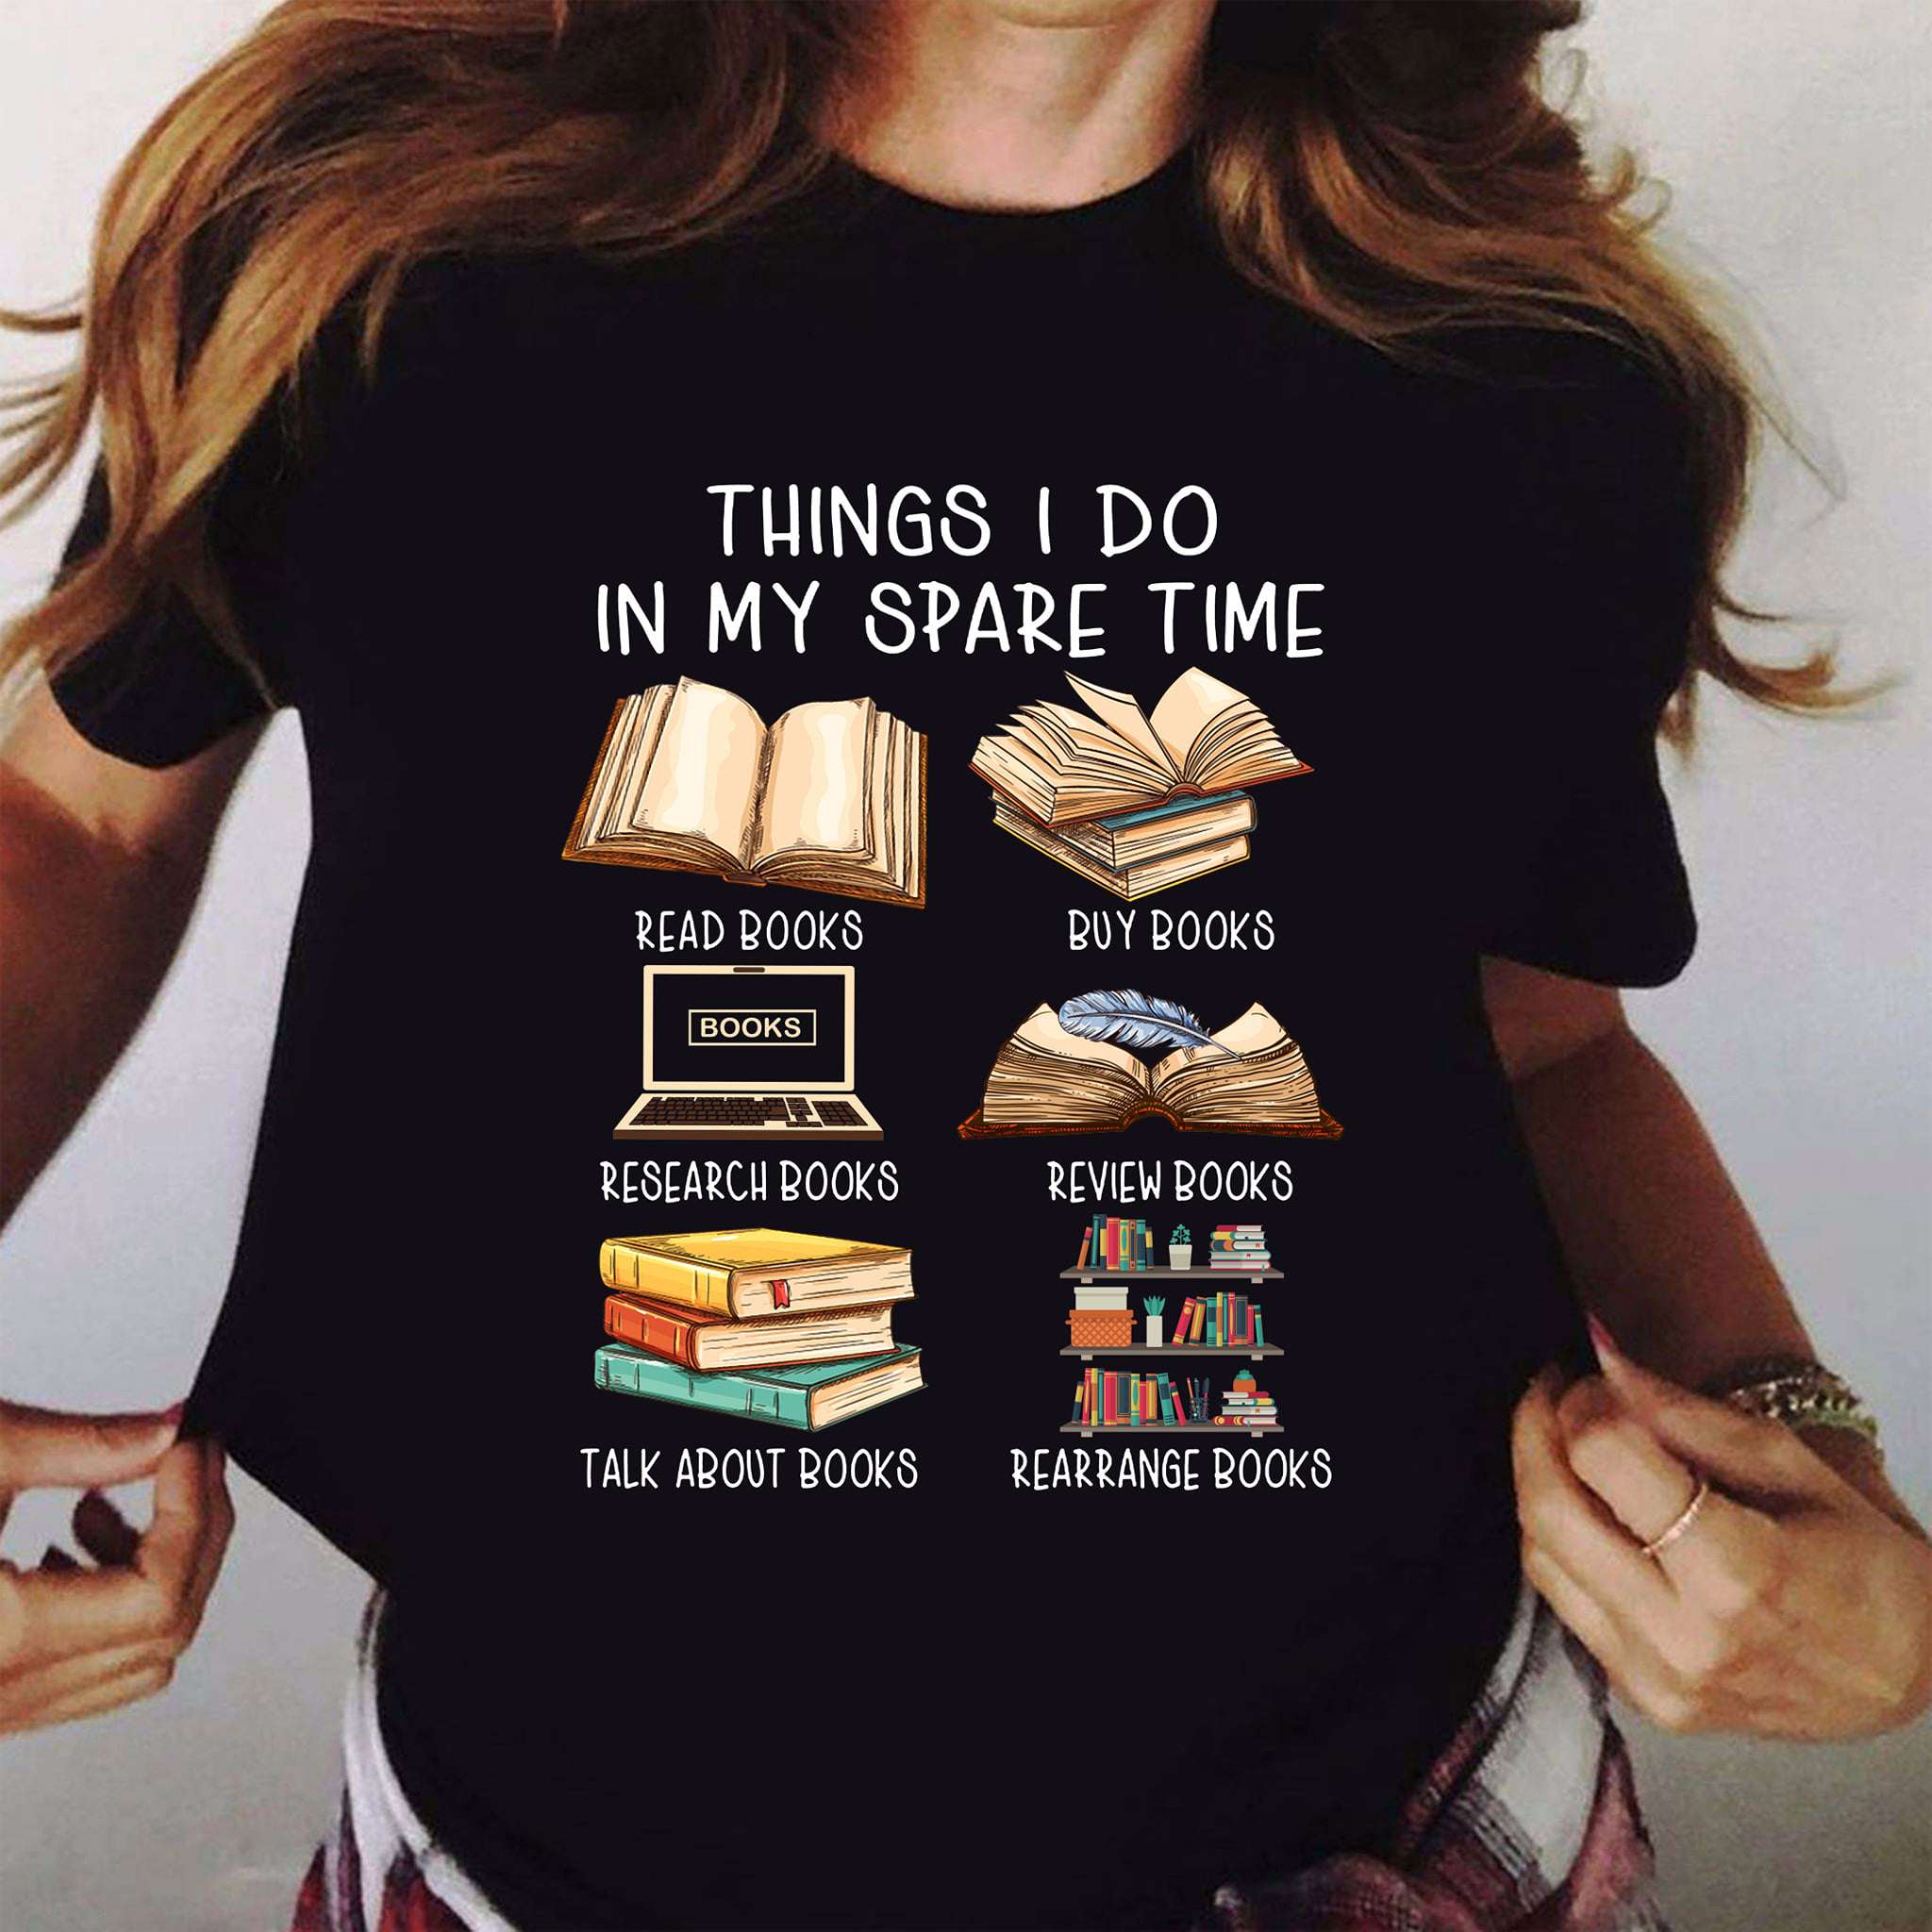 Things i do in my spare time - Read buy books, research books Shirt, Hoodie, Sweatshirt -